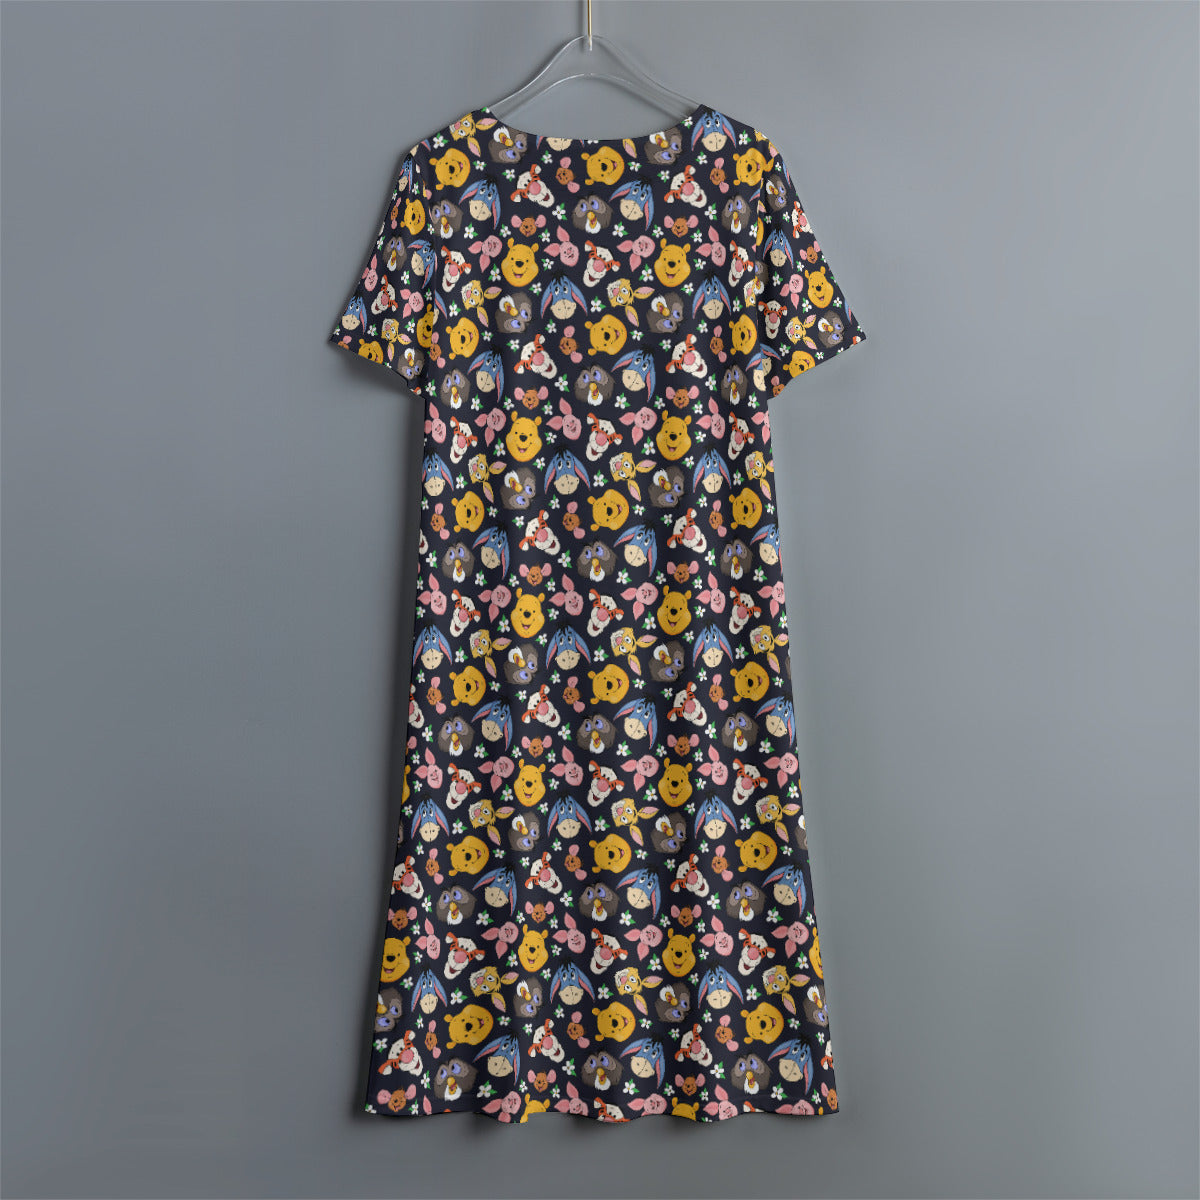 Hundred Acre Wood Friends Women's Swing Dress With Short Sleeve